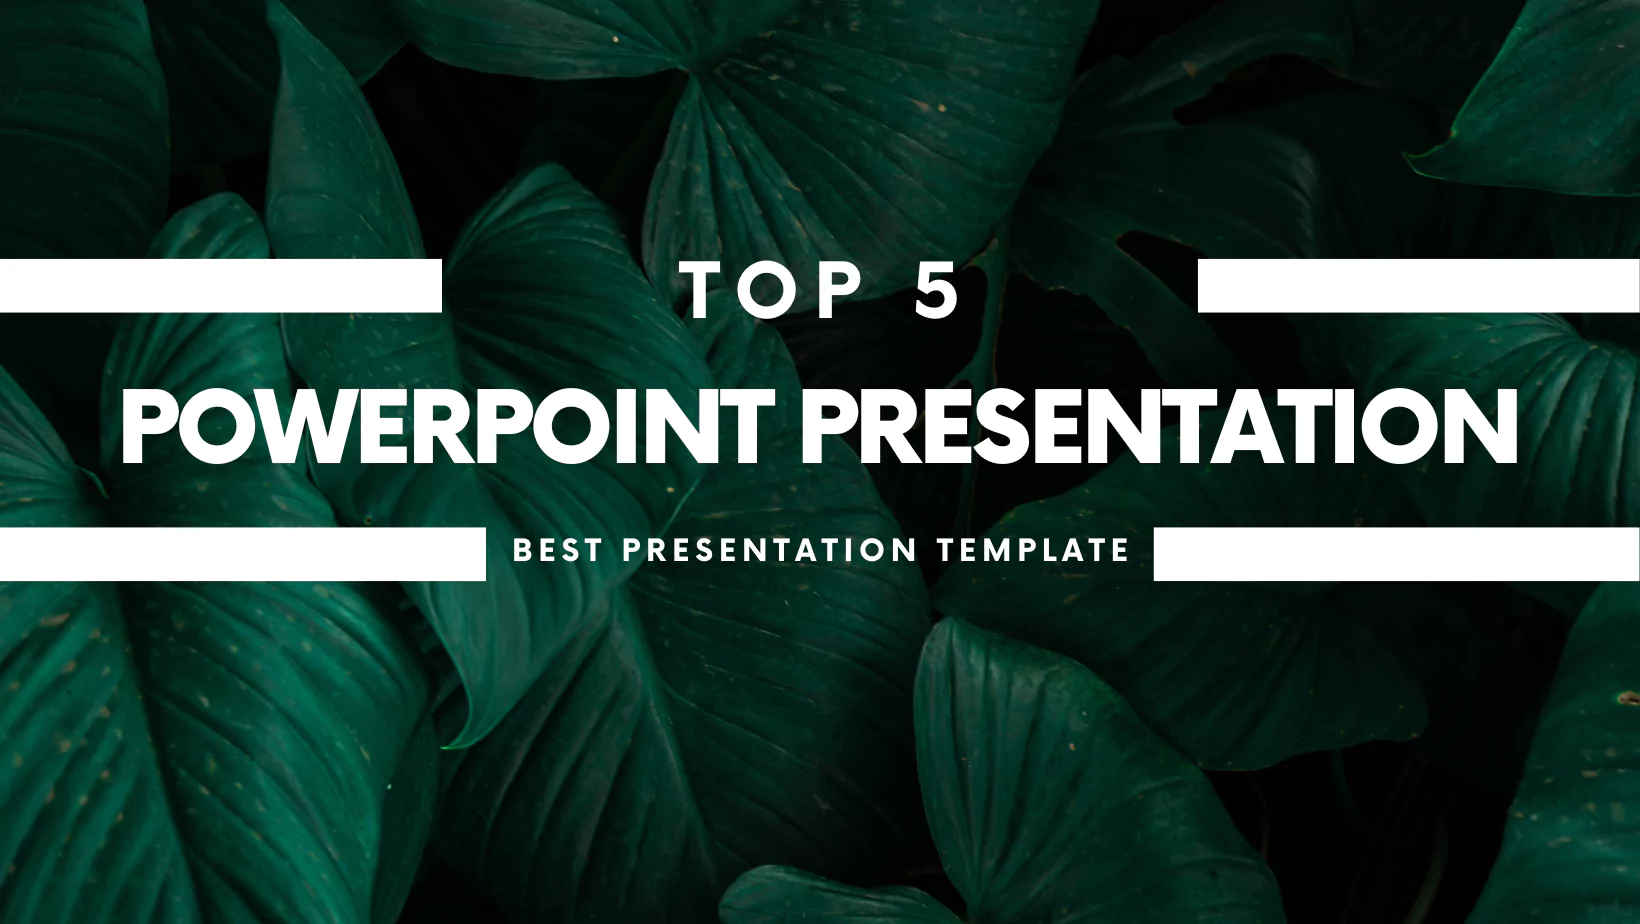 Top 5 PowerPoint Presentation Template Download | Free PPT